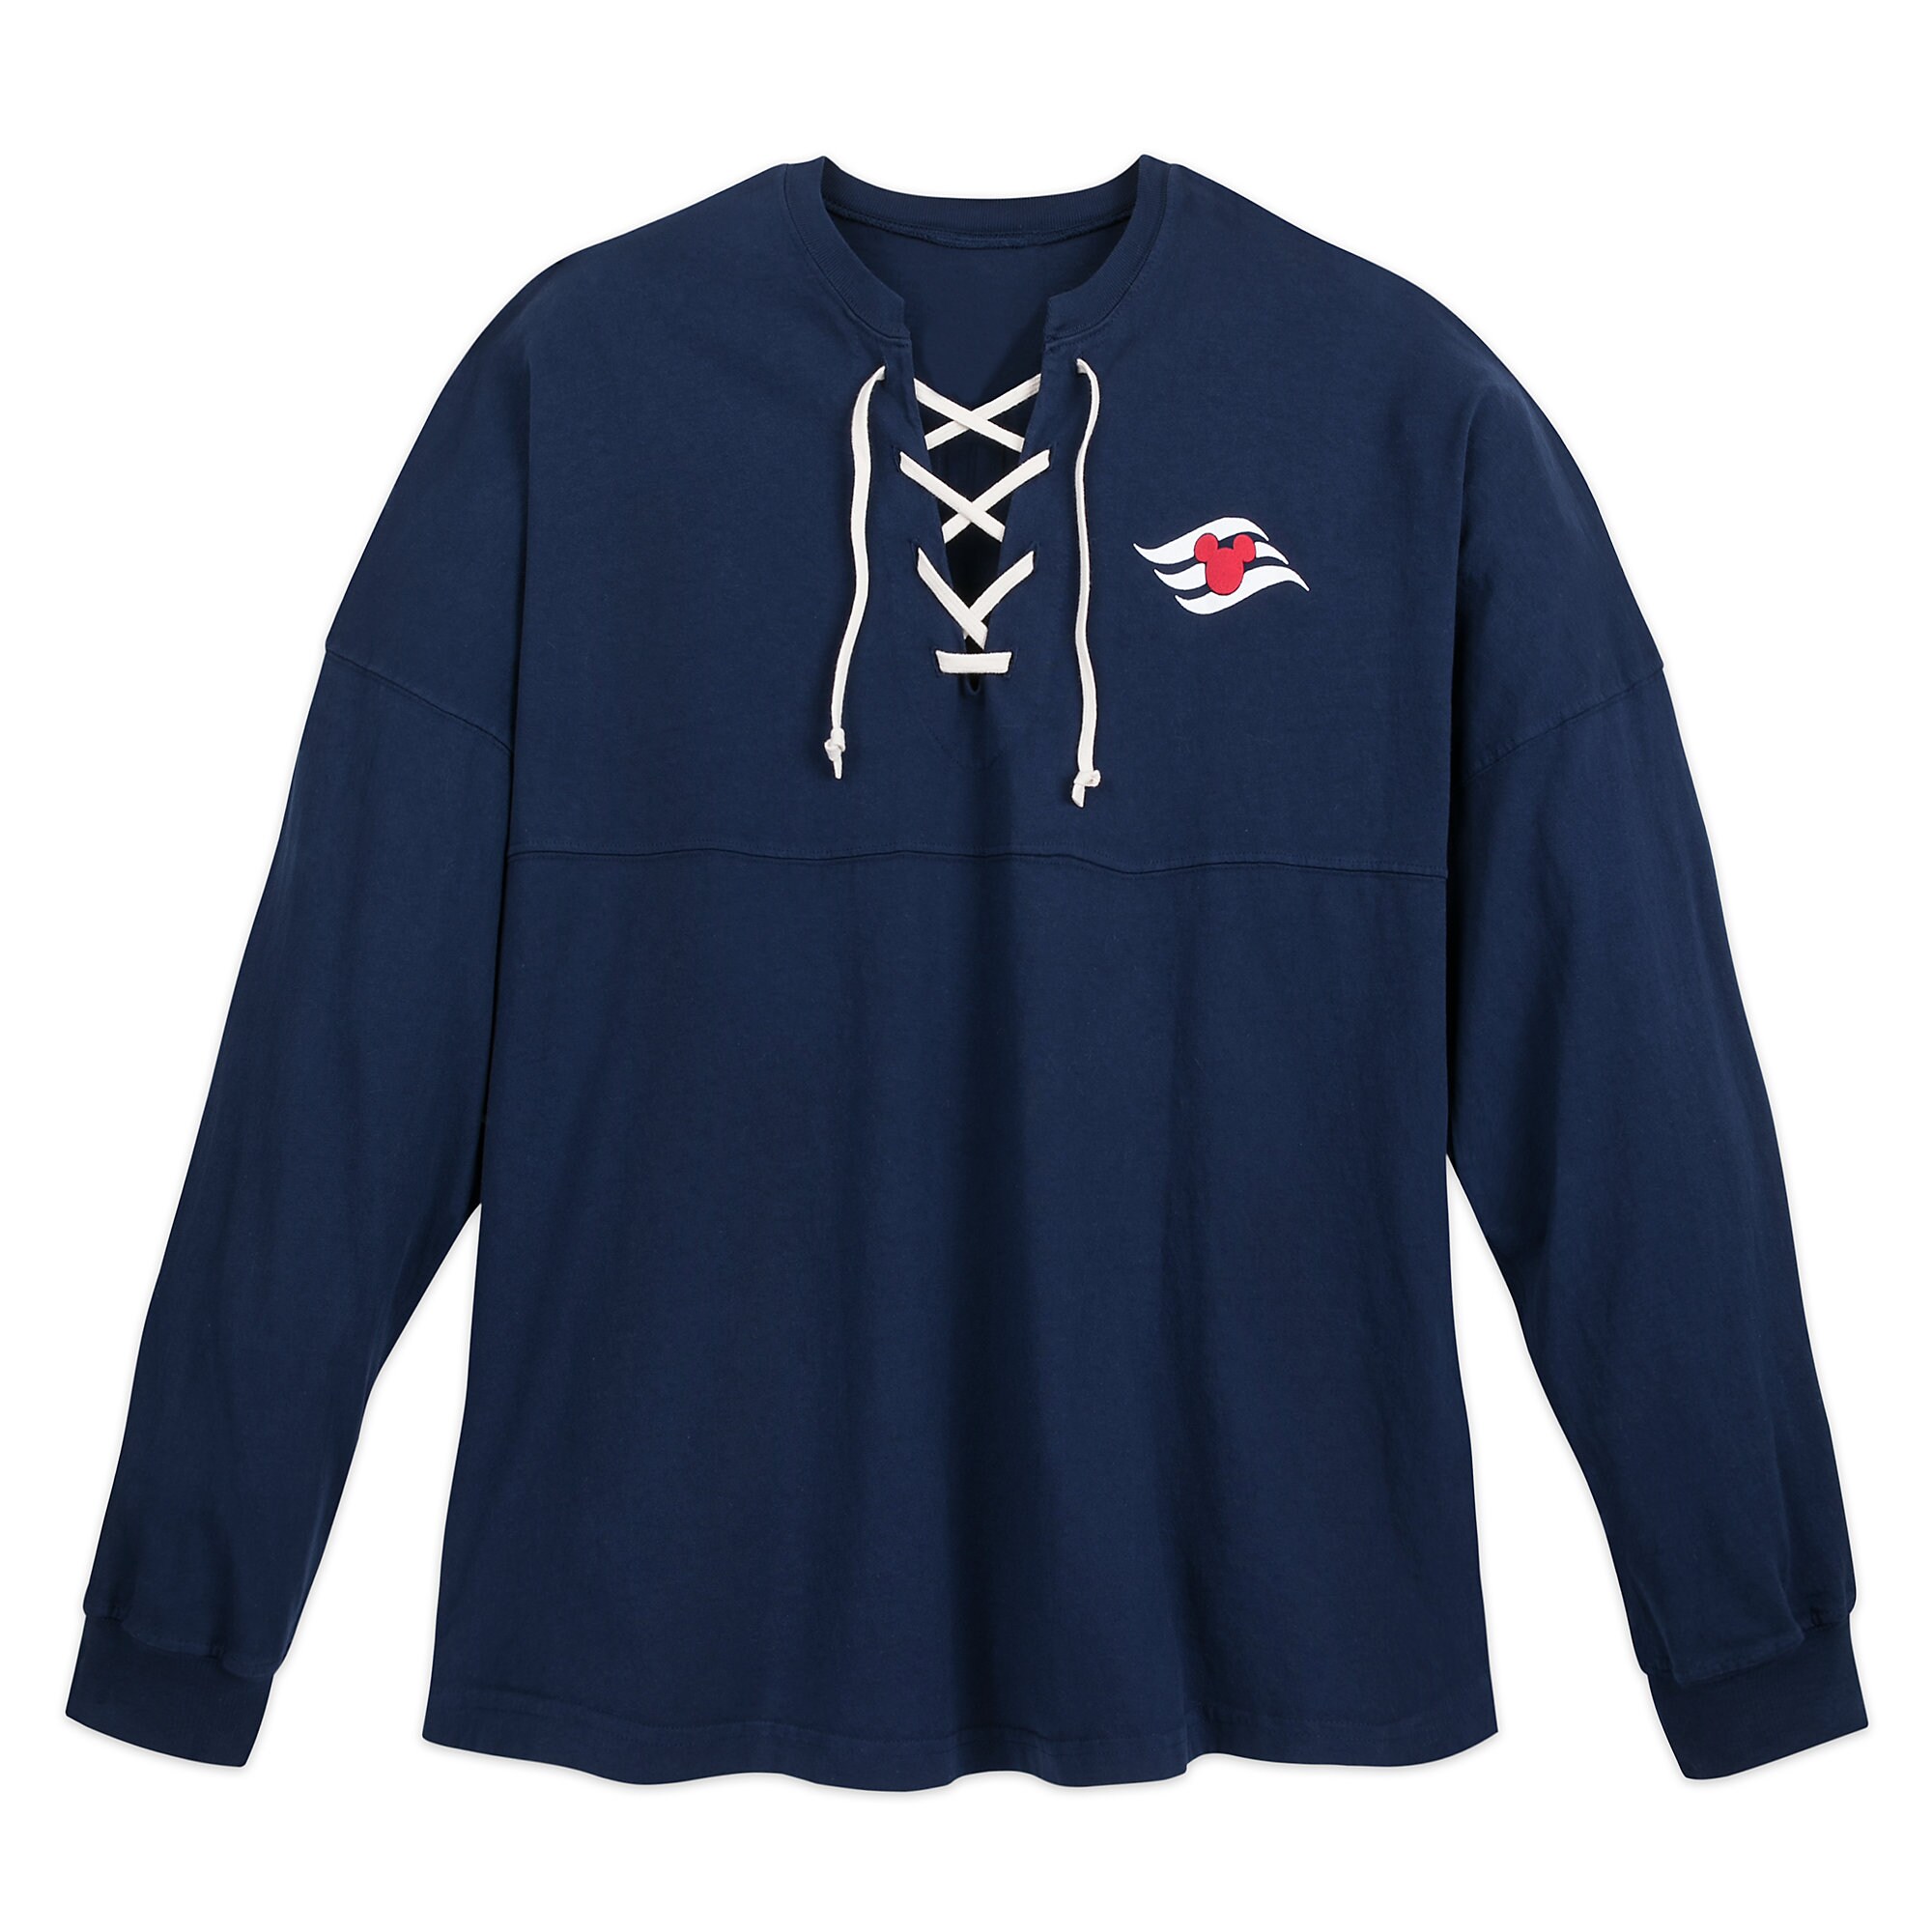 Disney Cruise Line Lace-Up Spirit Jersey for Adults - Navy